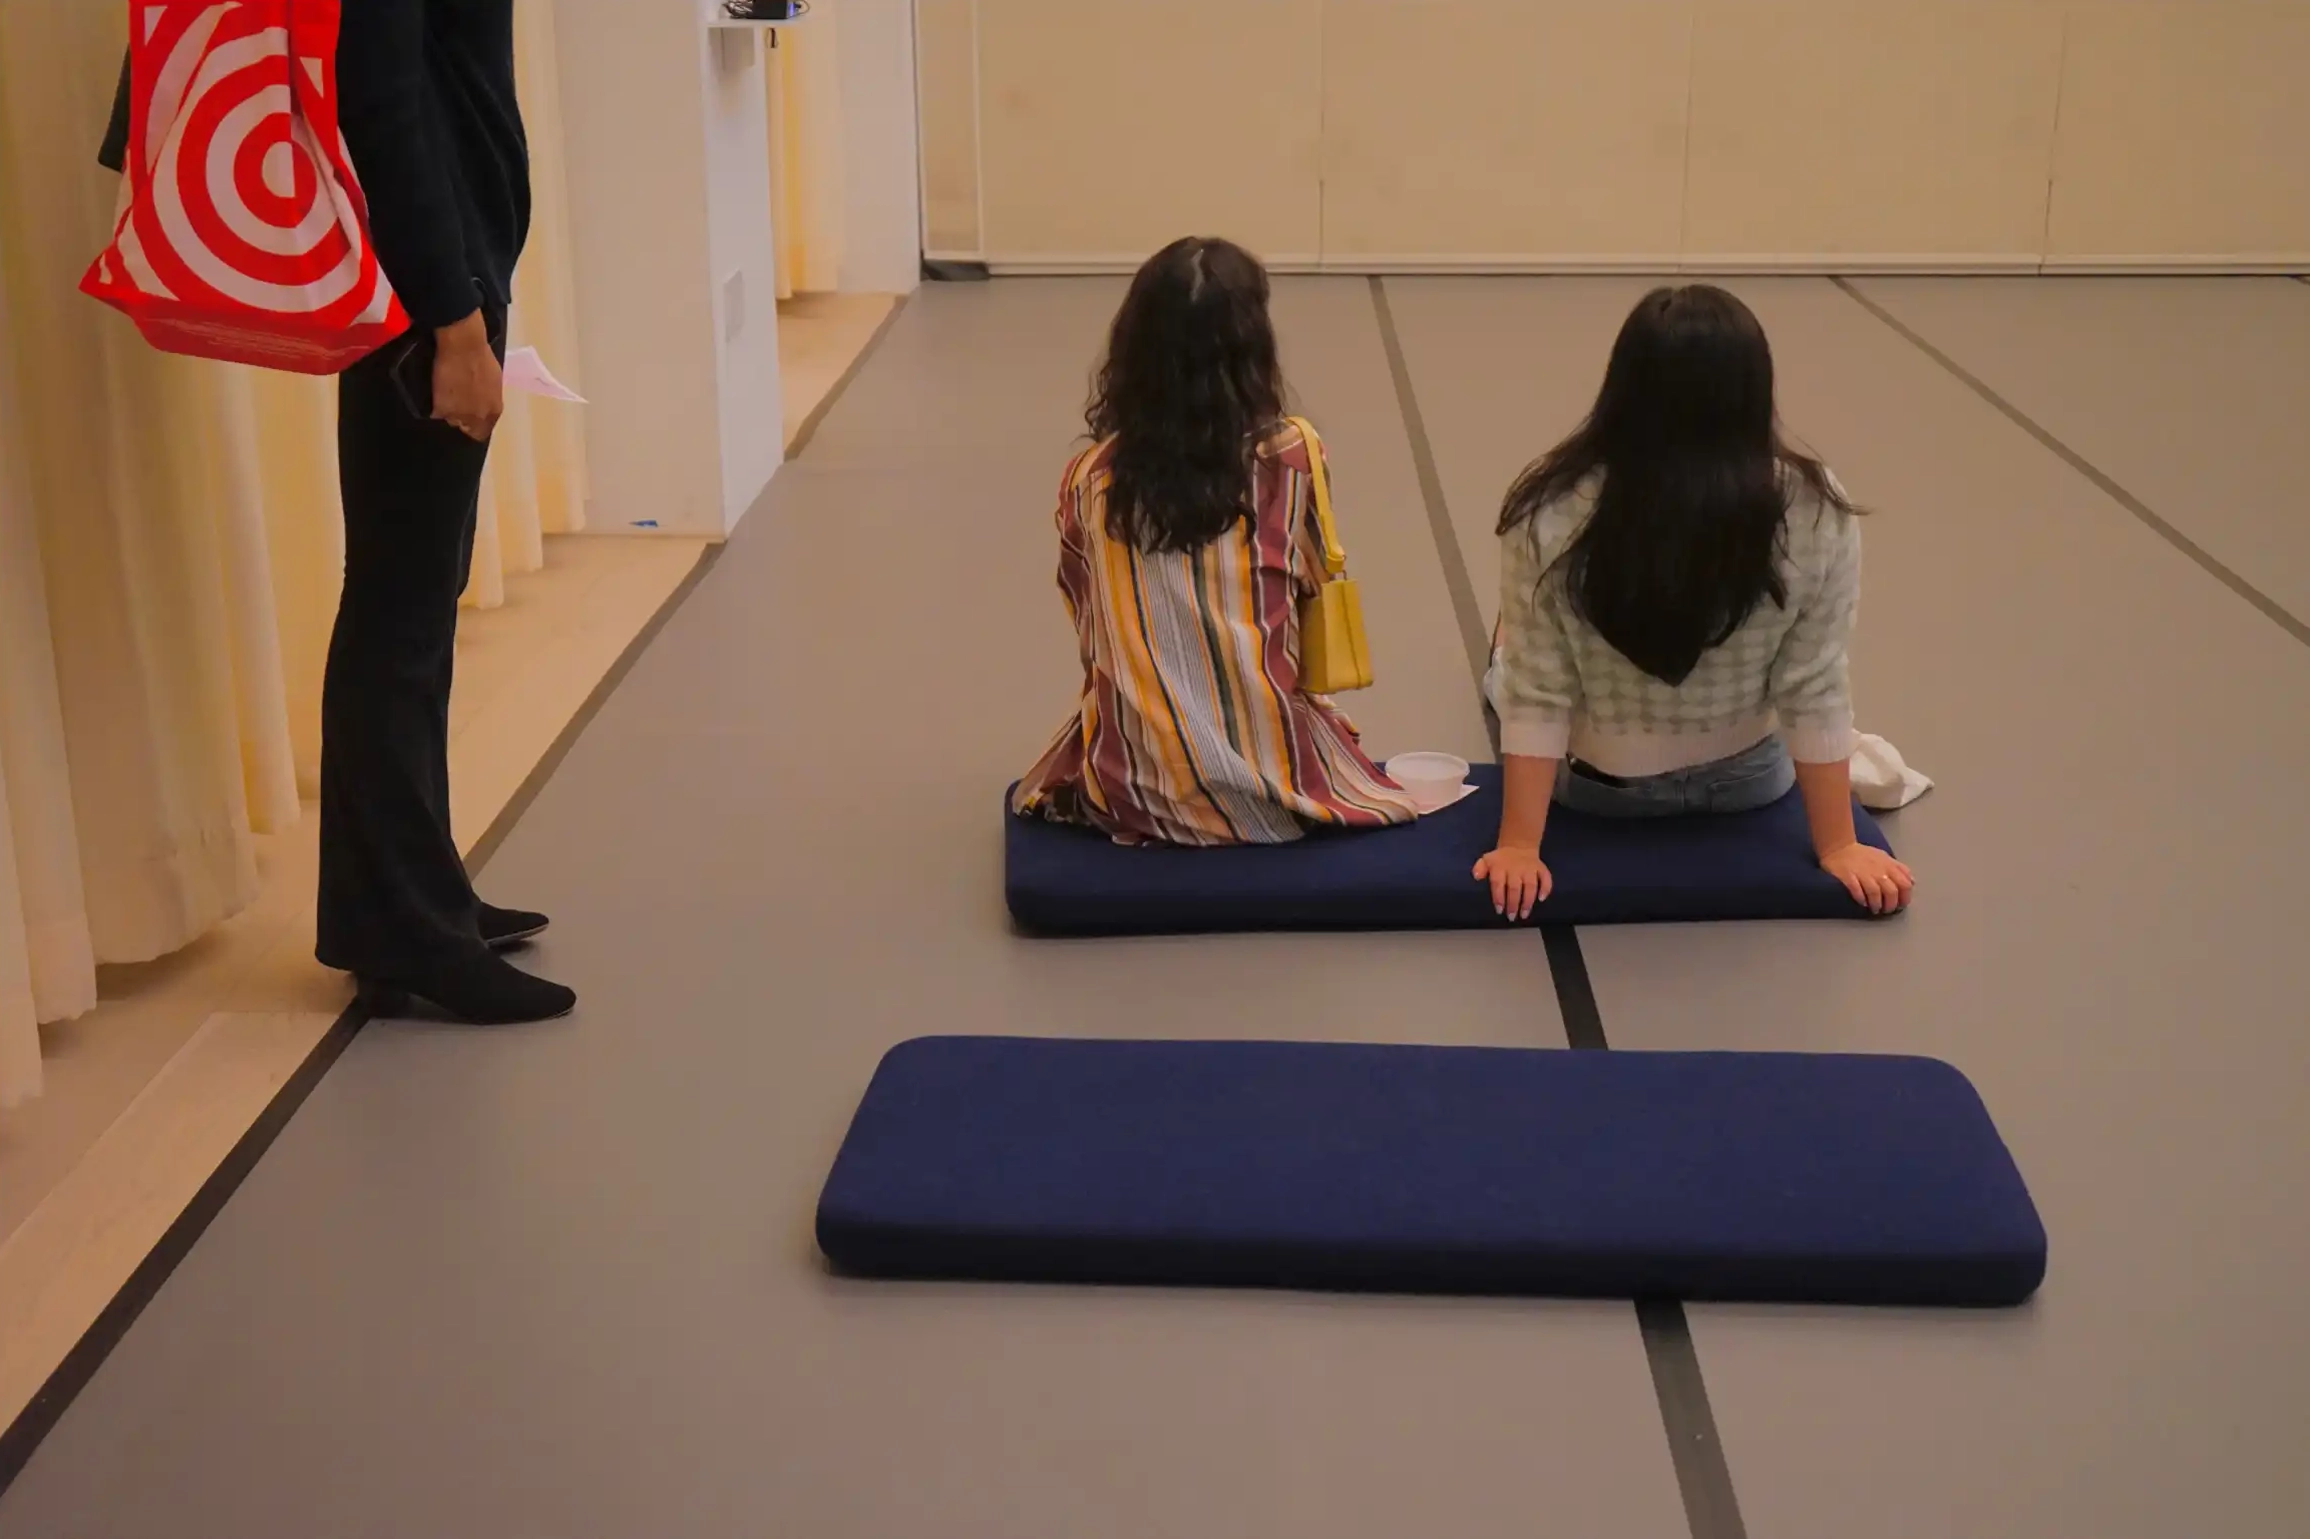 Two attendees sit on yoga mats and conversate, away from the dining table